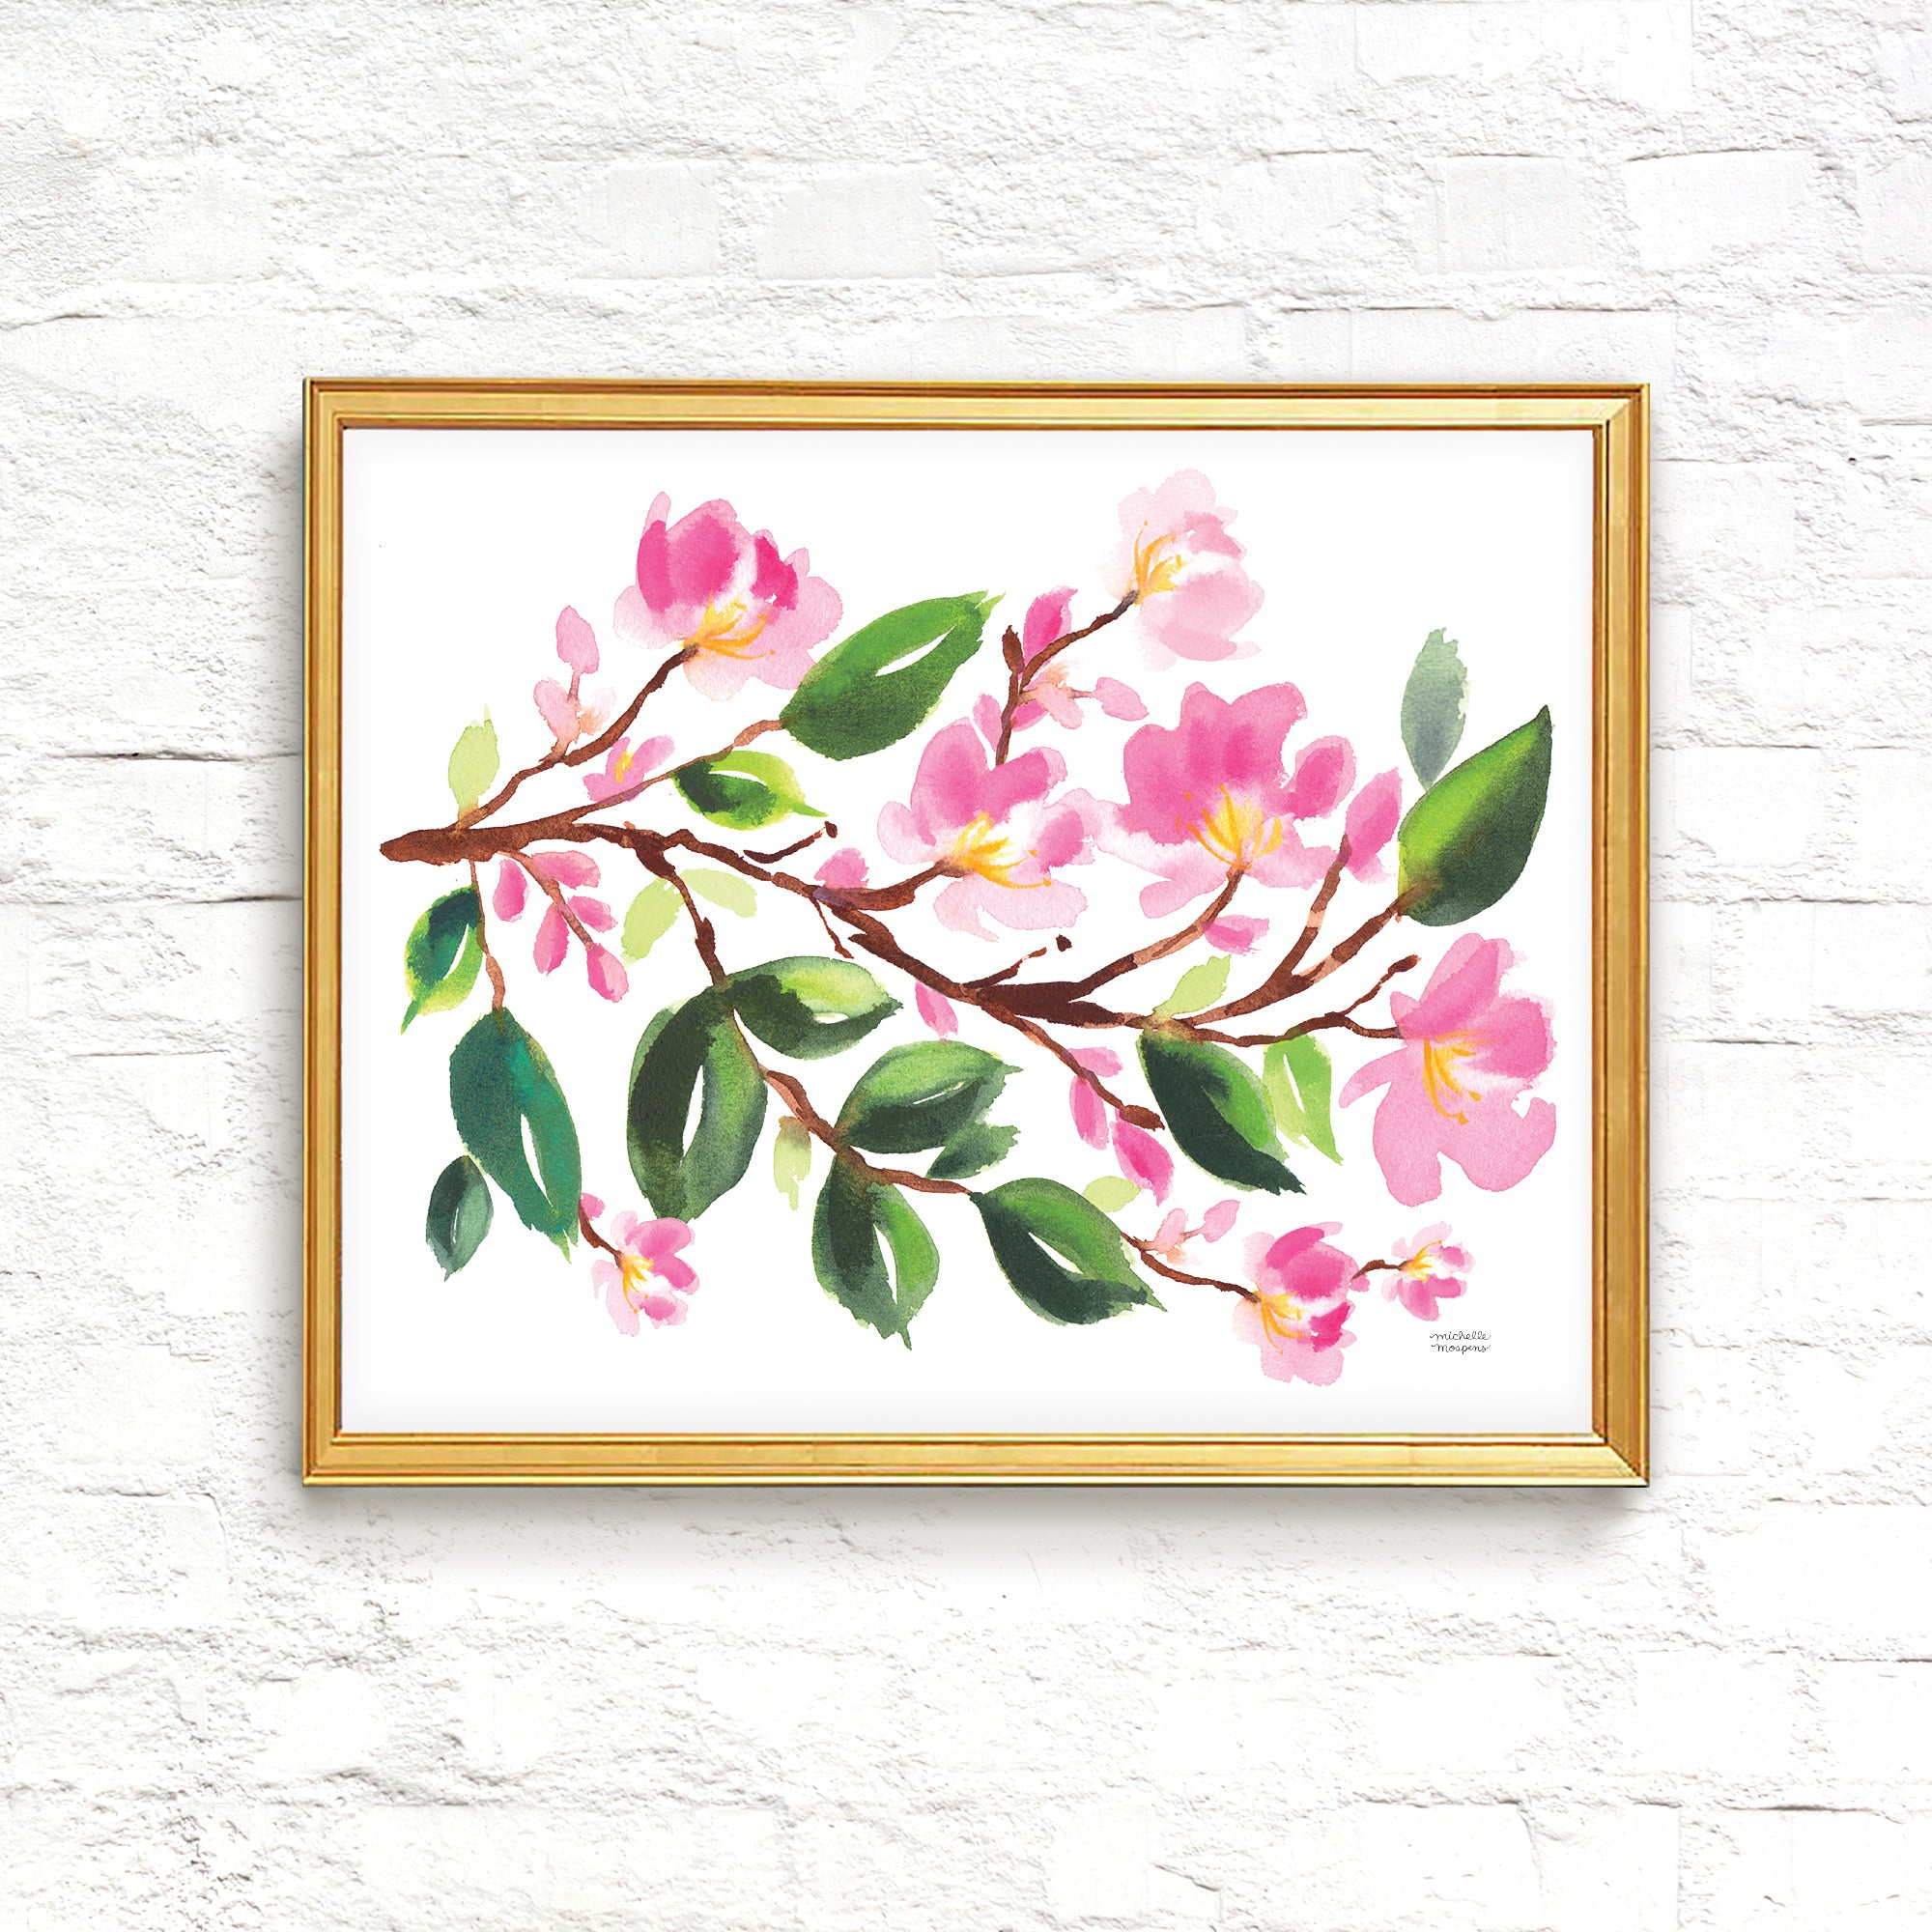 Watercolor Cherry Blossom Wall Art Print by Michelle Mospens